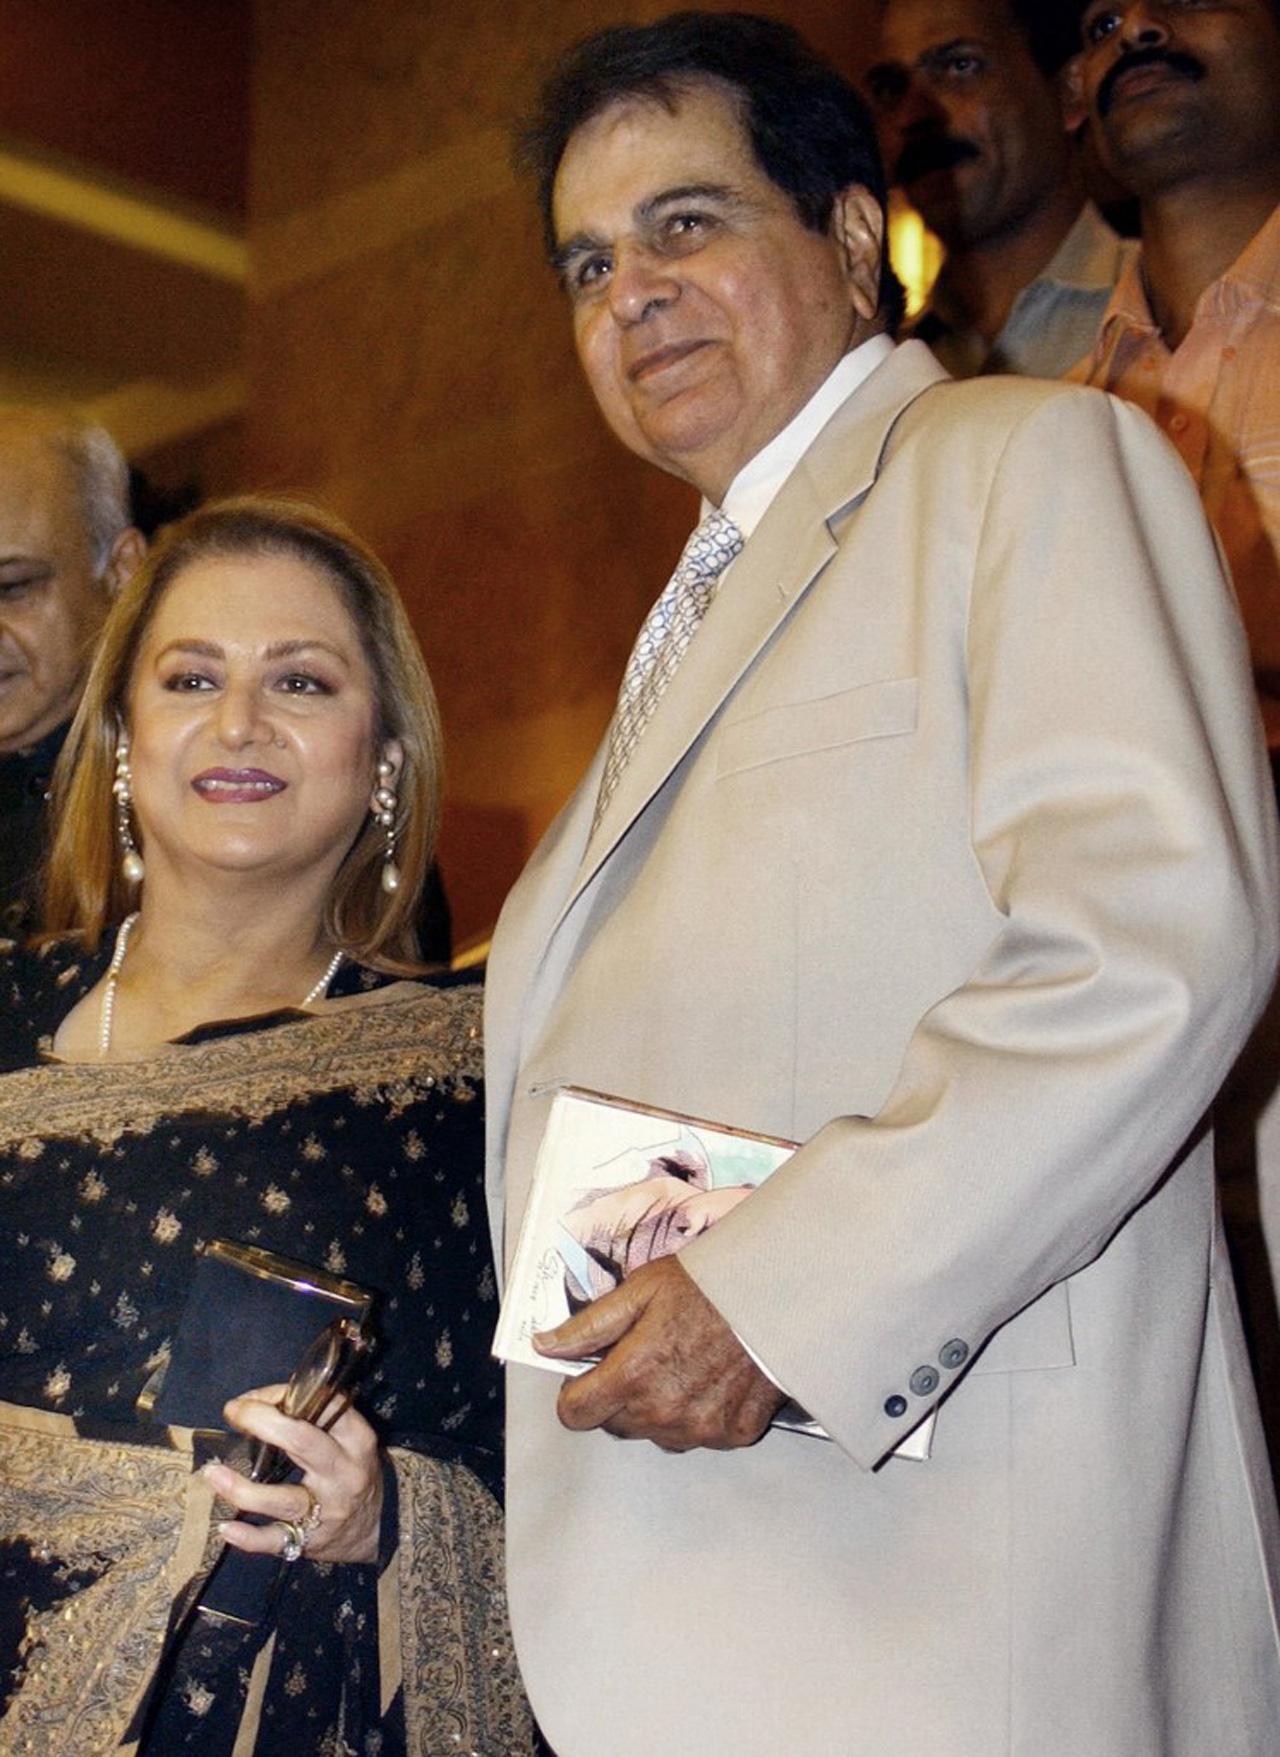 Dilip Kumar met Saira Banu, his wife of over five decades, at a party. She was 22 and he, 45. The couple married in 1966. Saira Banu was a constant by Kumar’s side, supporting him through the years and speaking for him when he was no longer in a position to